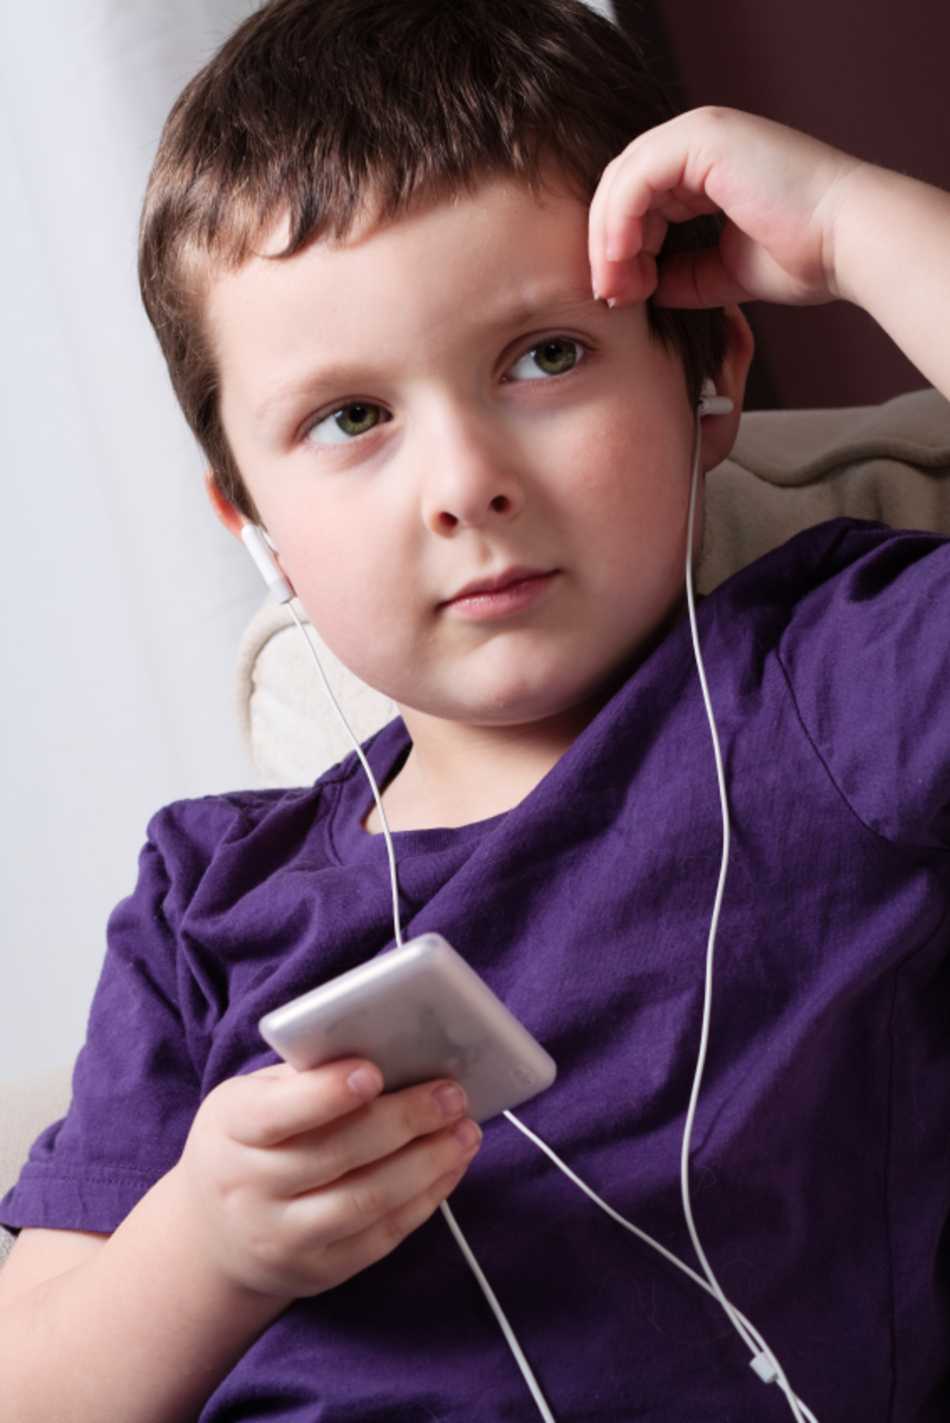 When Kids Aren’t Paying Attention, Is It Selective Hearing or Loss of Hearing?